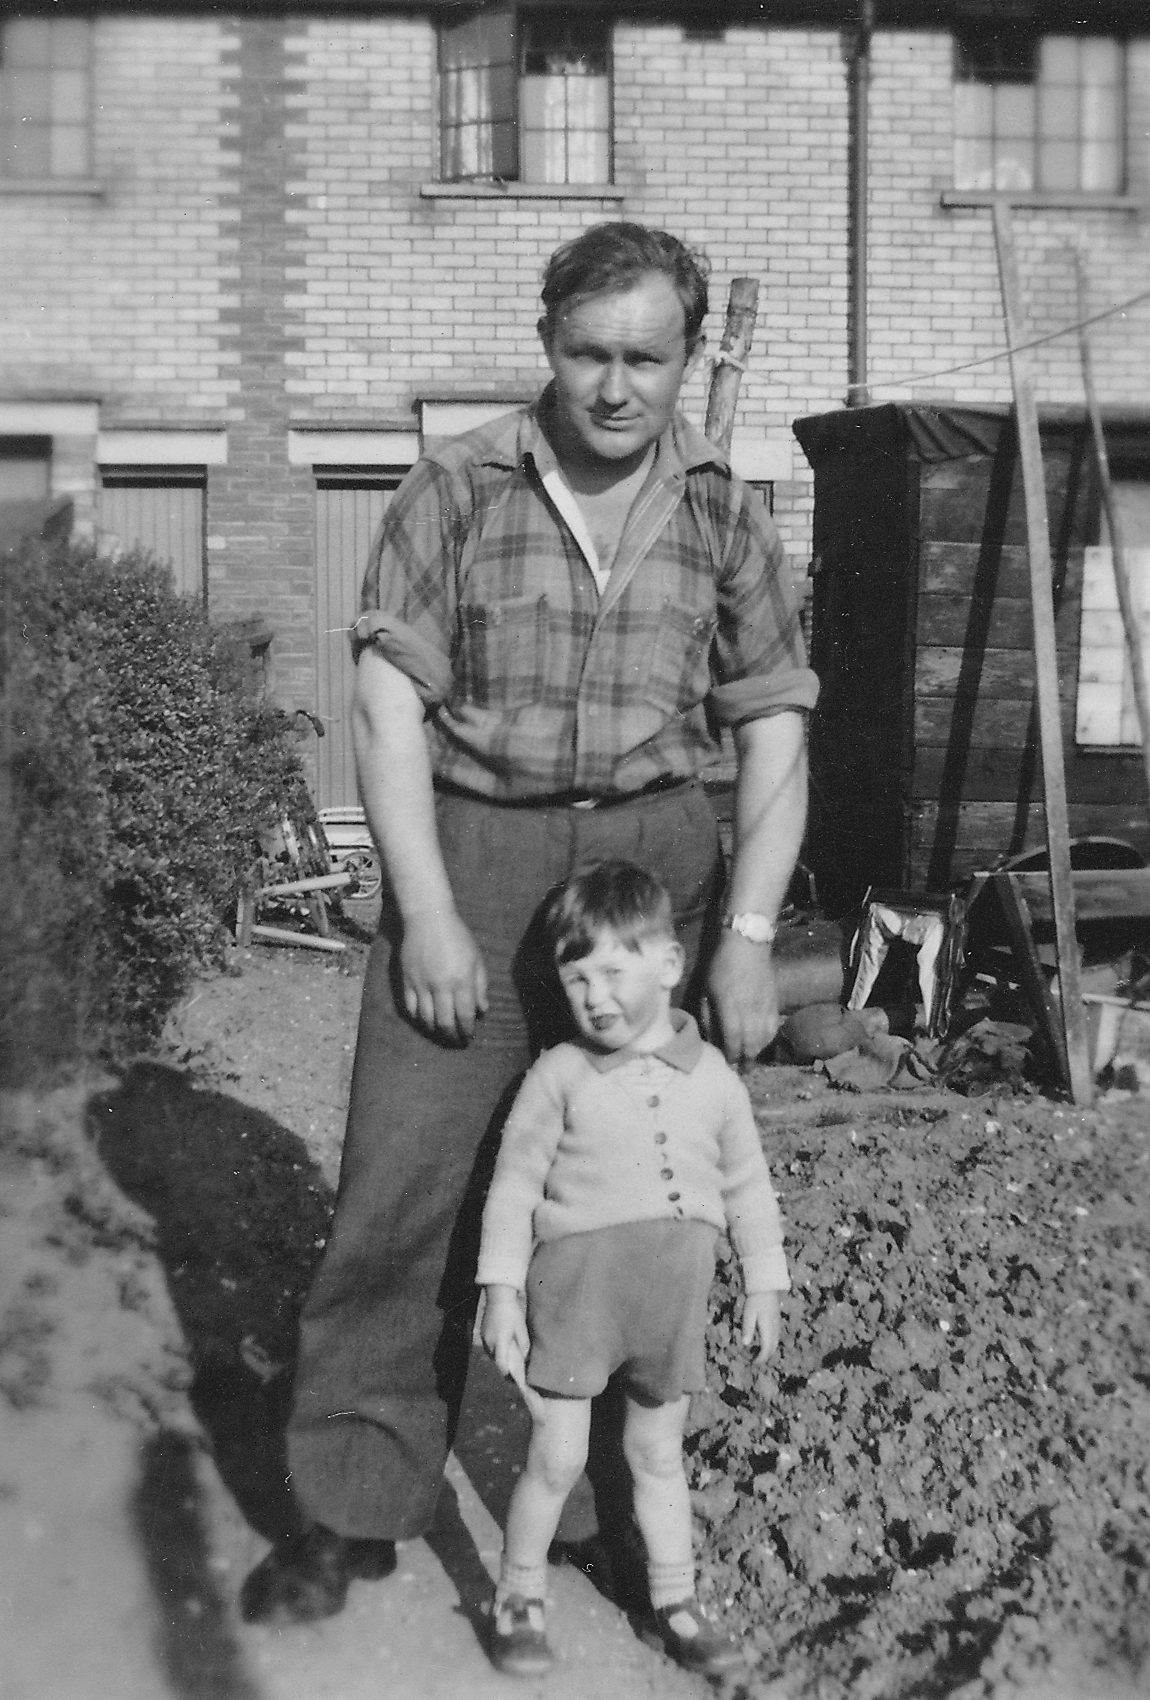 My uncle Alex and me (aged about 2 years old) at 3 Westfield Avenue, Wells